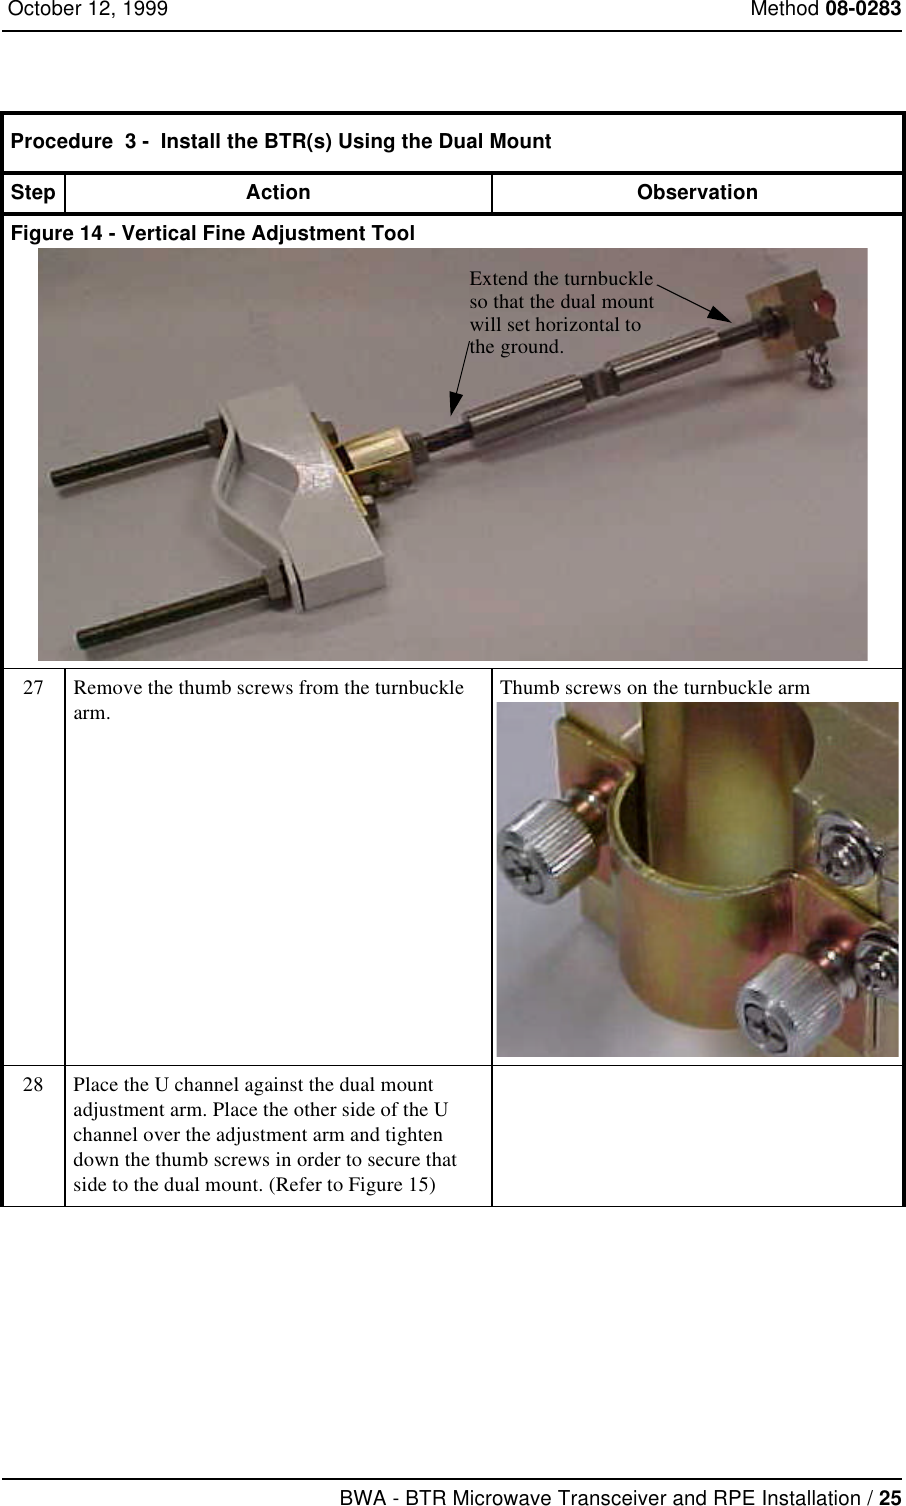 BWA - BTR Microwave Transceiver and RPE Installation / 25 October 12, 1999 Method 08-0283Figure 14 - Vertical Fine Adjustment Tool27 Remove the thumb screws from the turnbuckle arm.Thumb screws on the turnbuckle arm28 Place the U channel against the dual mount adjustment arm. Place the other side of the U channel over the adjustment arm and tighten down the thumb screws in order to secure that side to the dual mount. (Refer to Figure 15)Procedure  3 -  Install the BTR(s) Using the Dual MountStep Action ObservationExtend the turnbuckleso that the dual mountwill set horizontal to the ground.